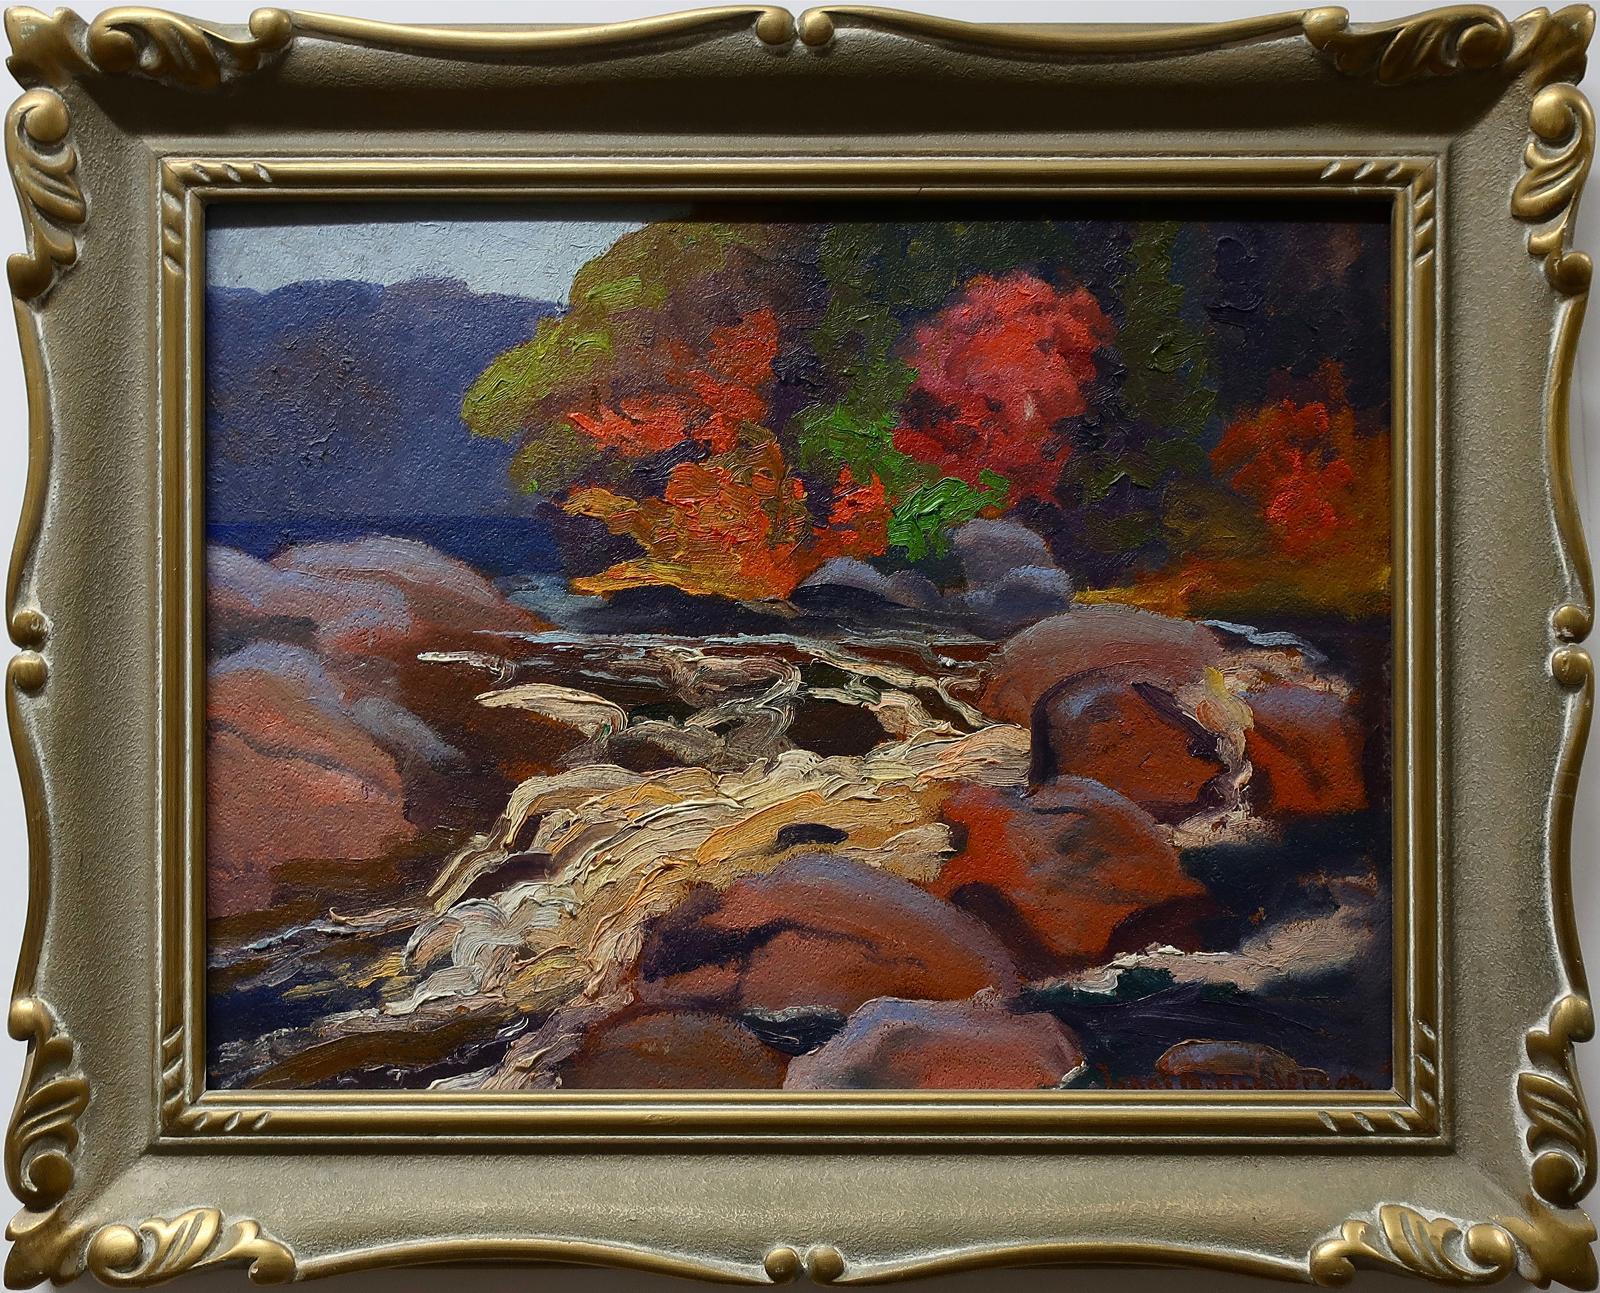 Janet M. Henderson - Untitled (River And Rocks - Autumn)